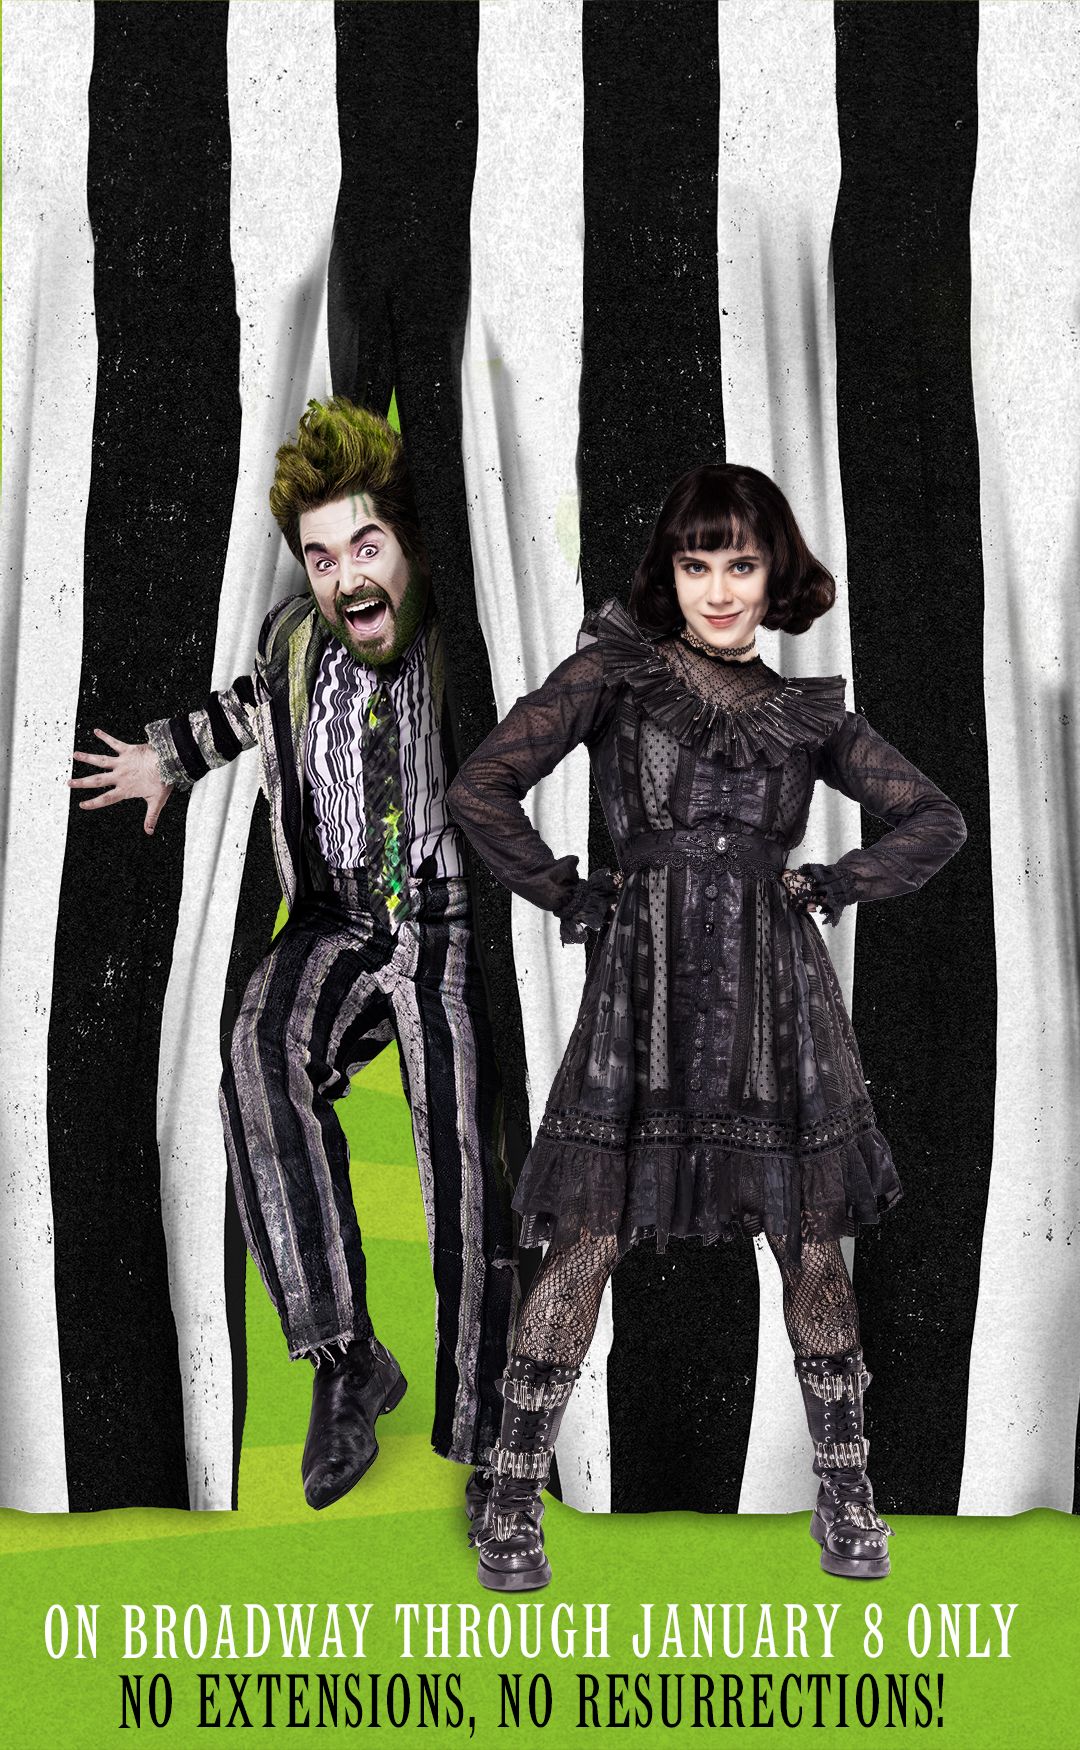 BEETLEJUICE The Musical | Official Tour Website